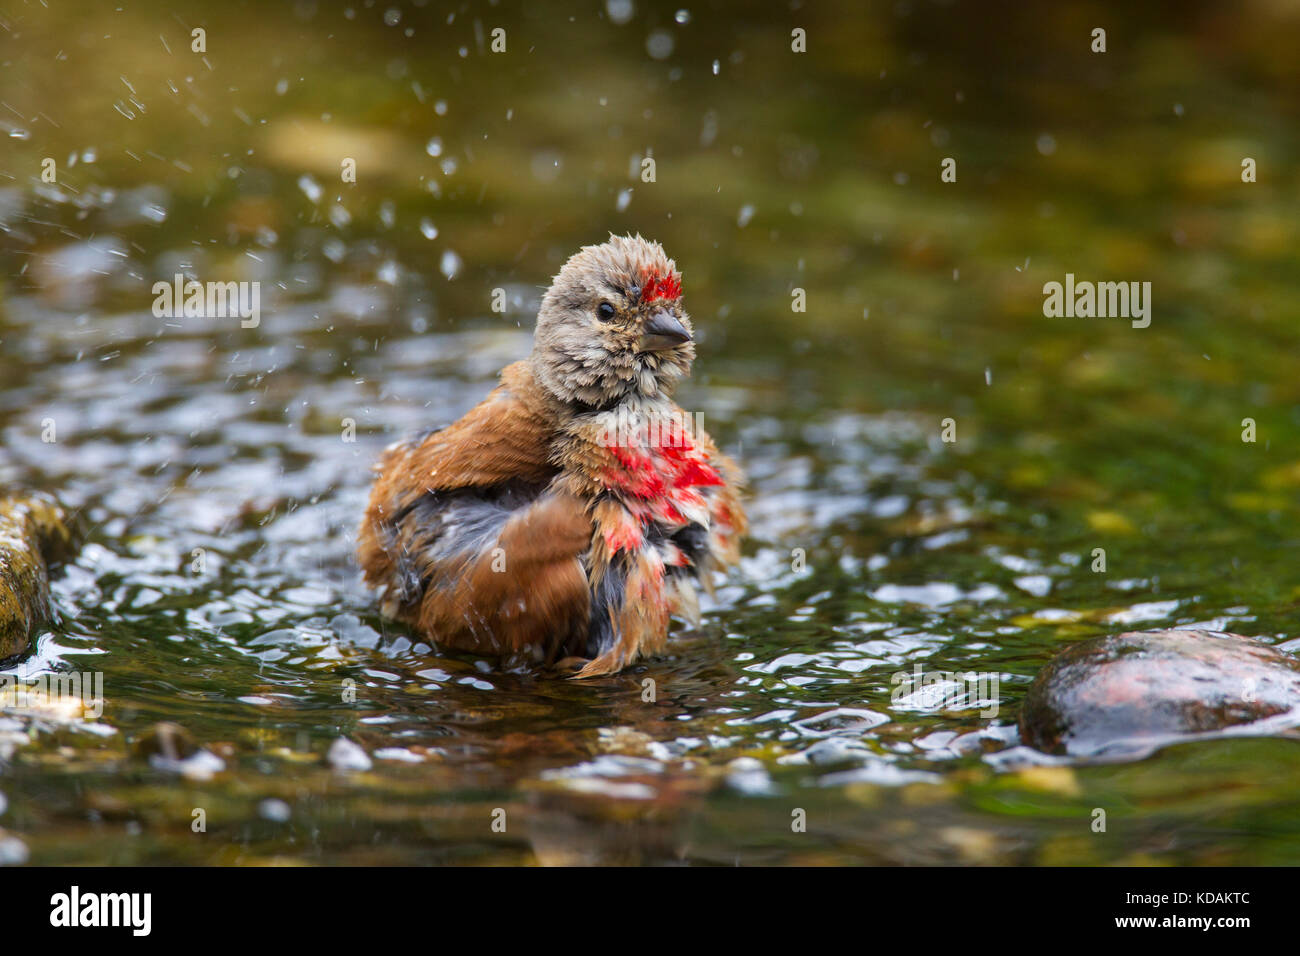 Common linnet (Linaria cannabina / Acanthis cannabina / Carduelis cannabina) male bathing in shallow water of brook Stock Photo